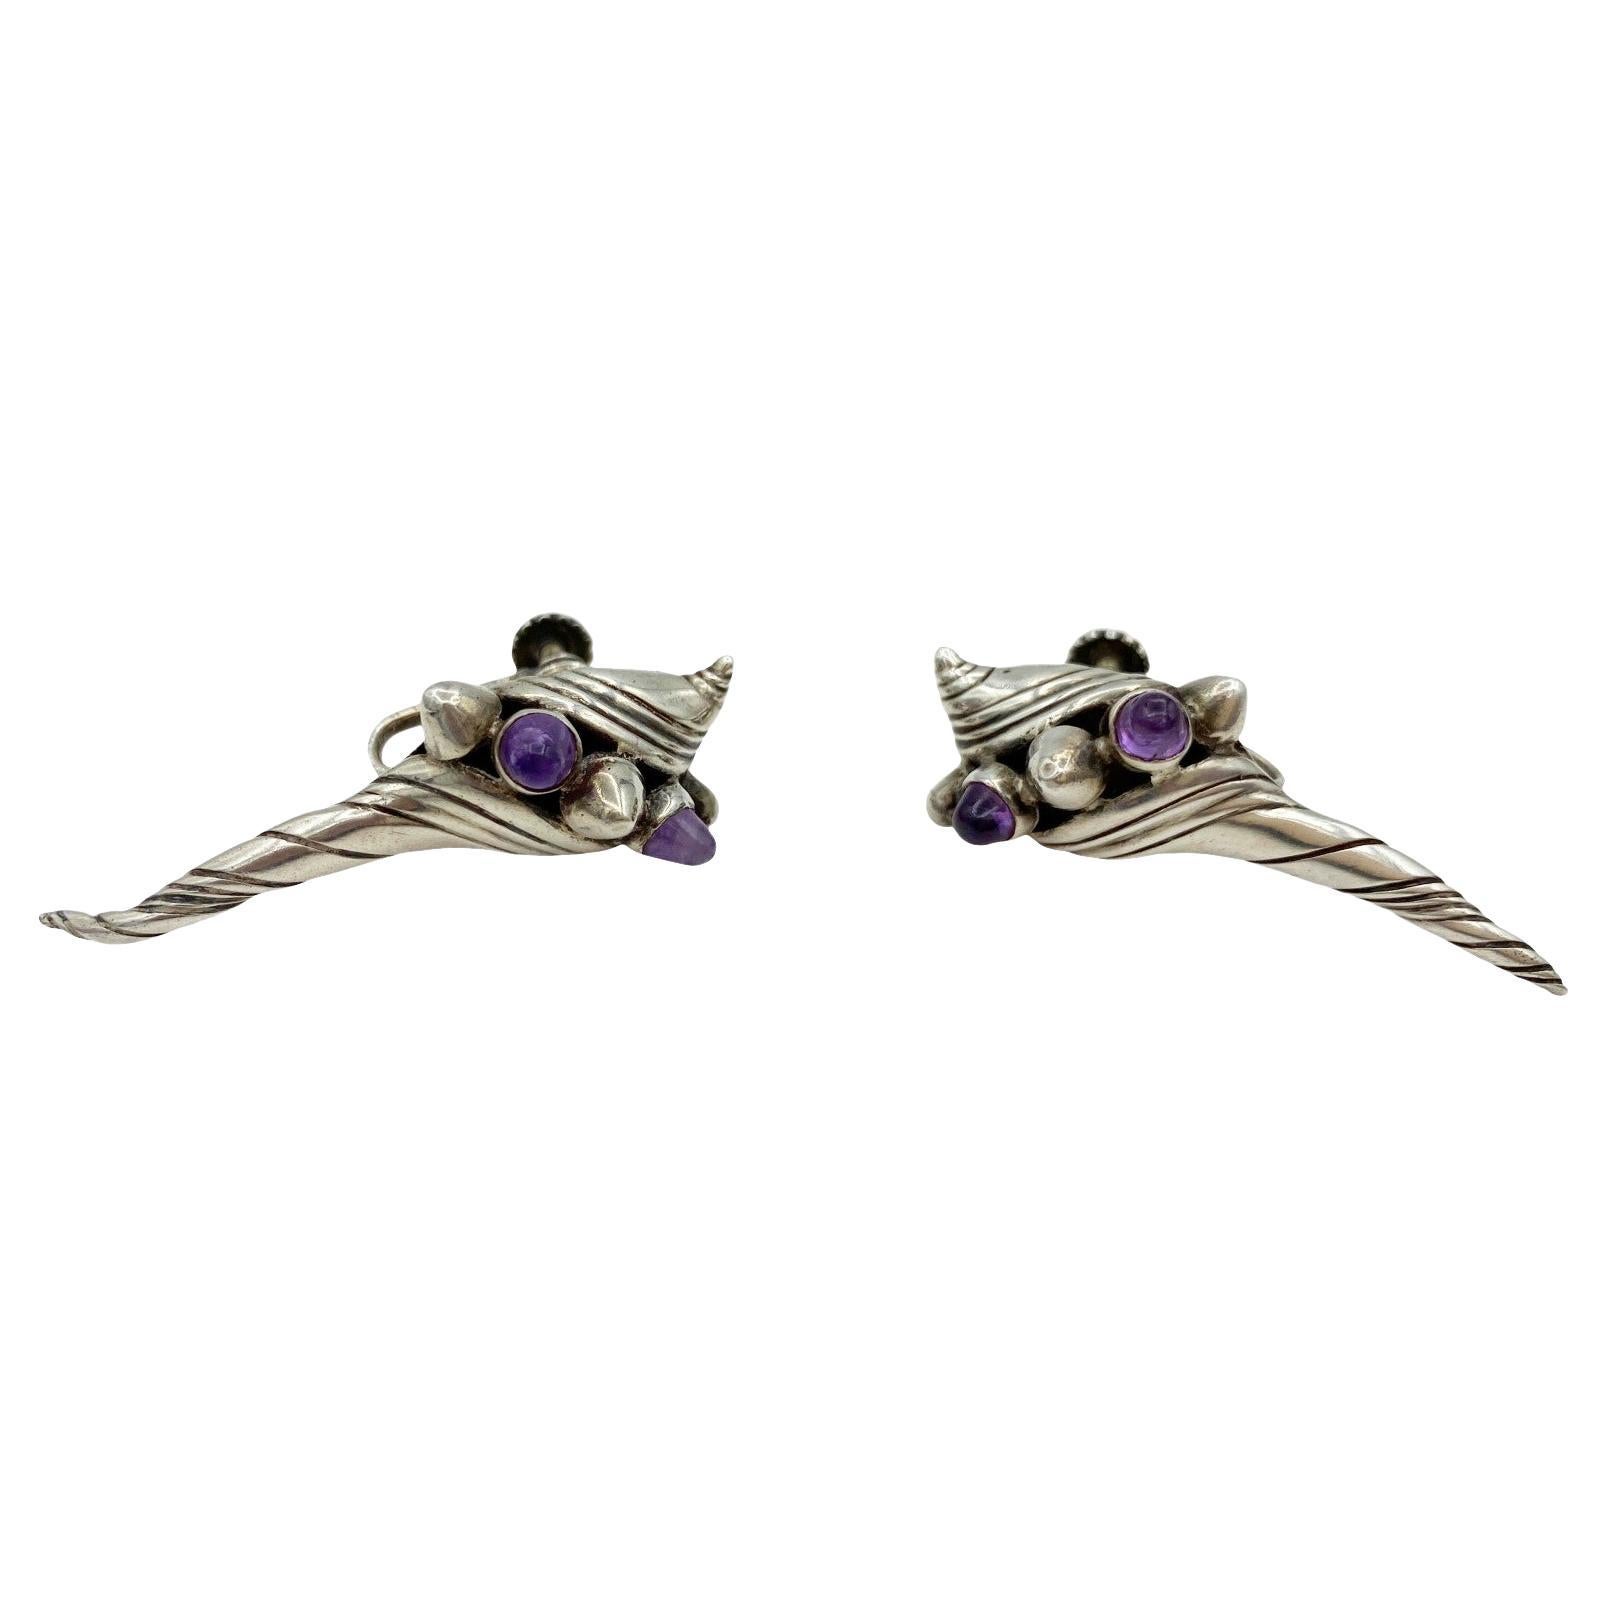 William Spratling Amethyst Spiral Conch Sea Shell Silver Earrings Vintage, 1950s For Sale